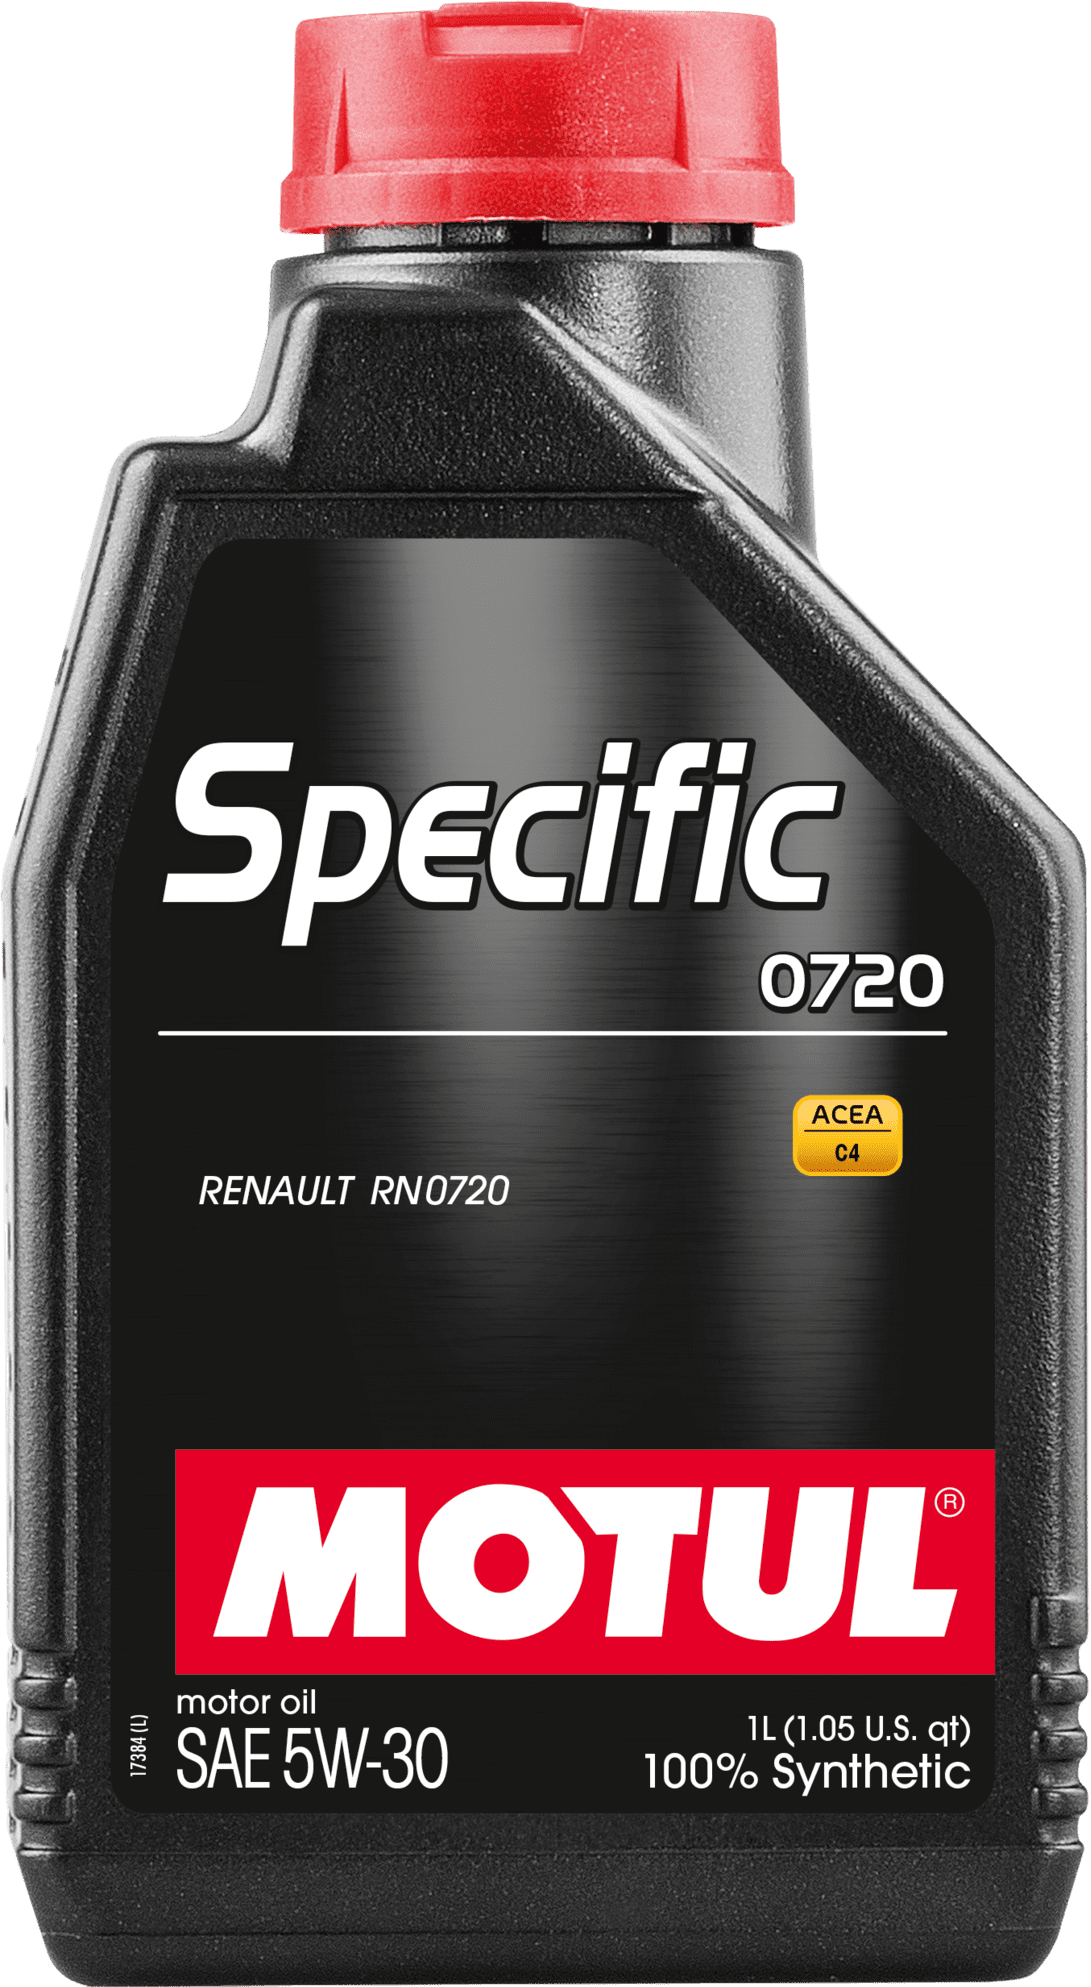 102208-1 RENAULT RN0720 approved engine lubricant - 100% Synthetic lubricant specially designed for the latest generation of diesel engines with particulate filter (DPF) from RENAULT group (Renault, Dacia, Samsung) requiring an approved Renault RN0720 engine oil.